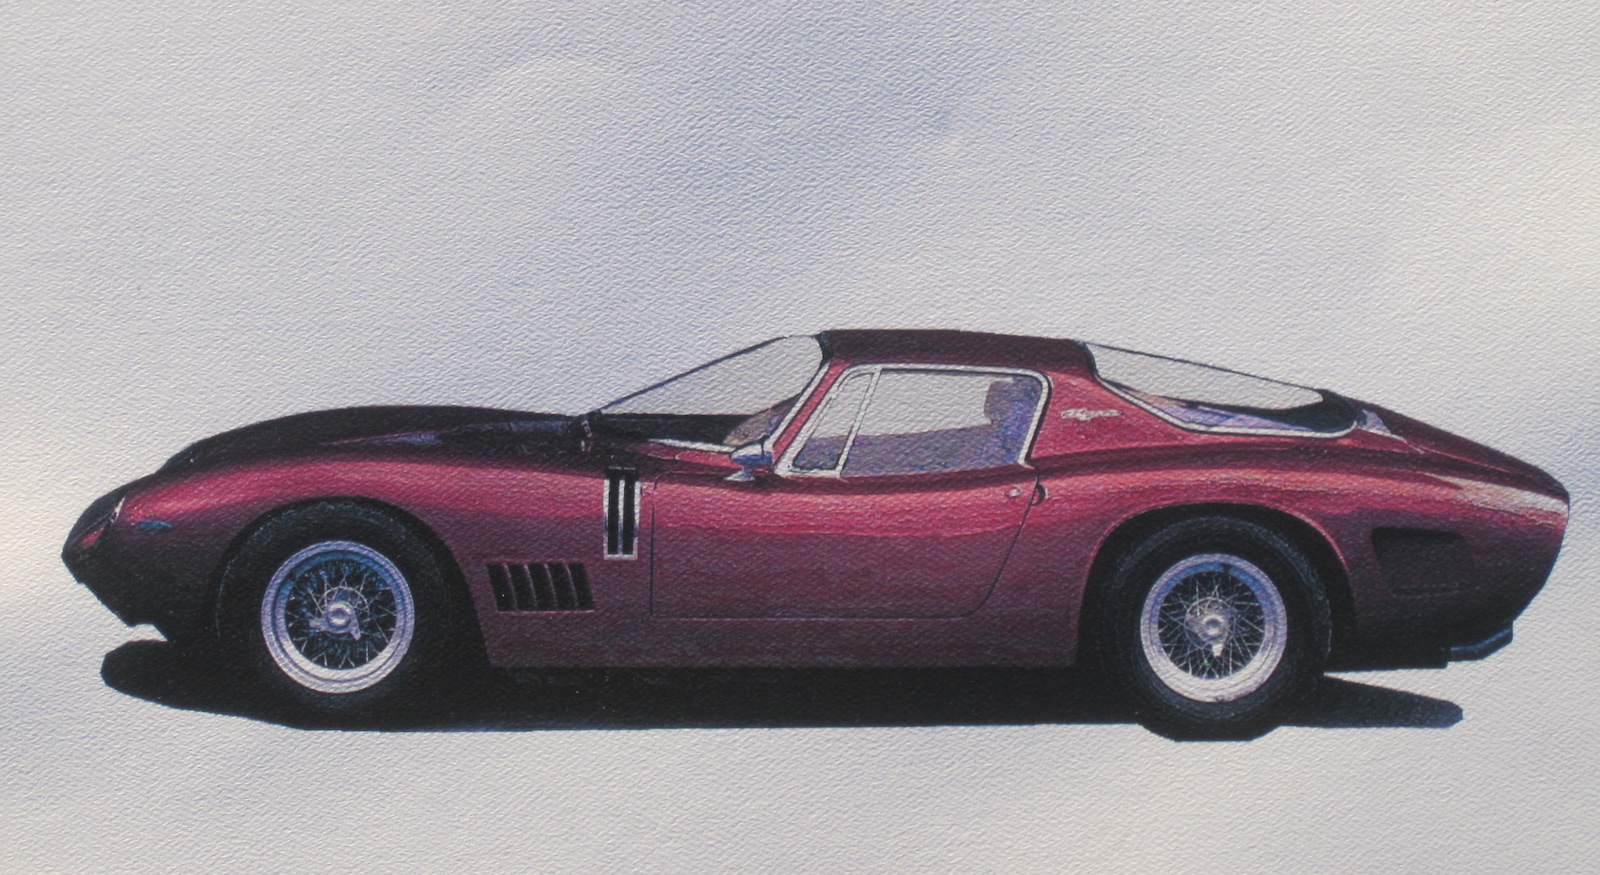 One Artist’s Lifelong Obsession With an Obscure Italian Bolide